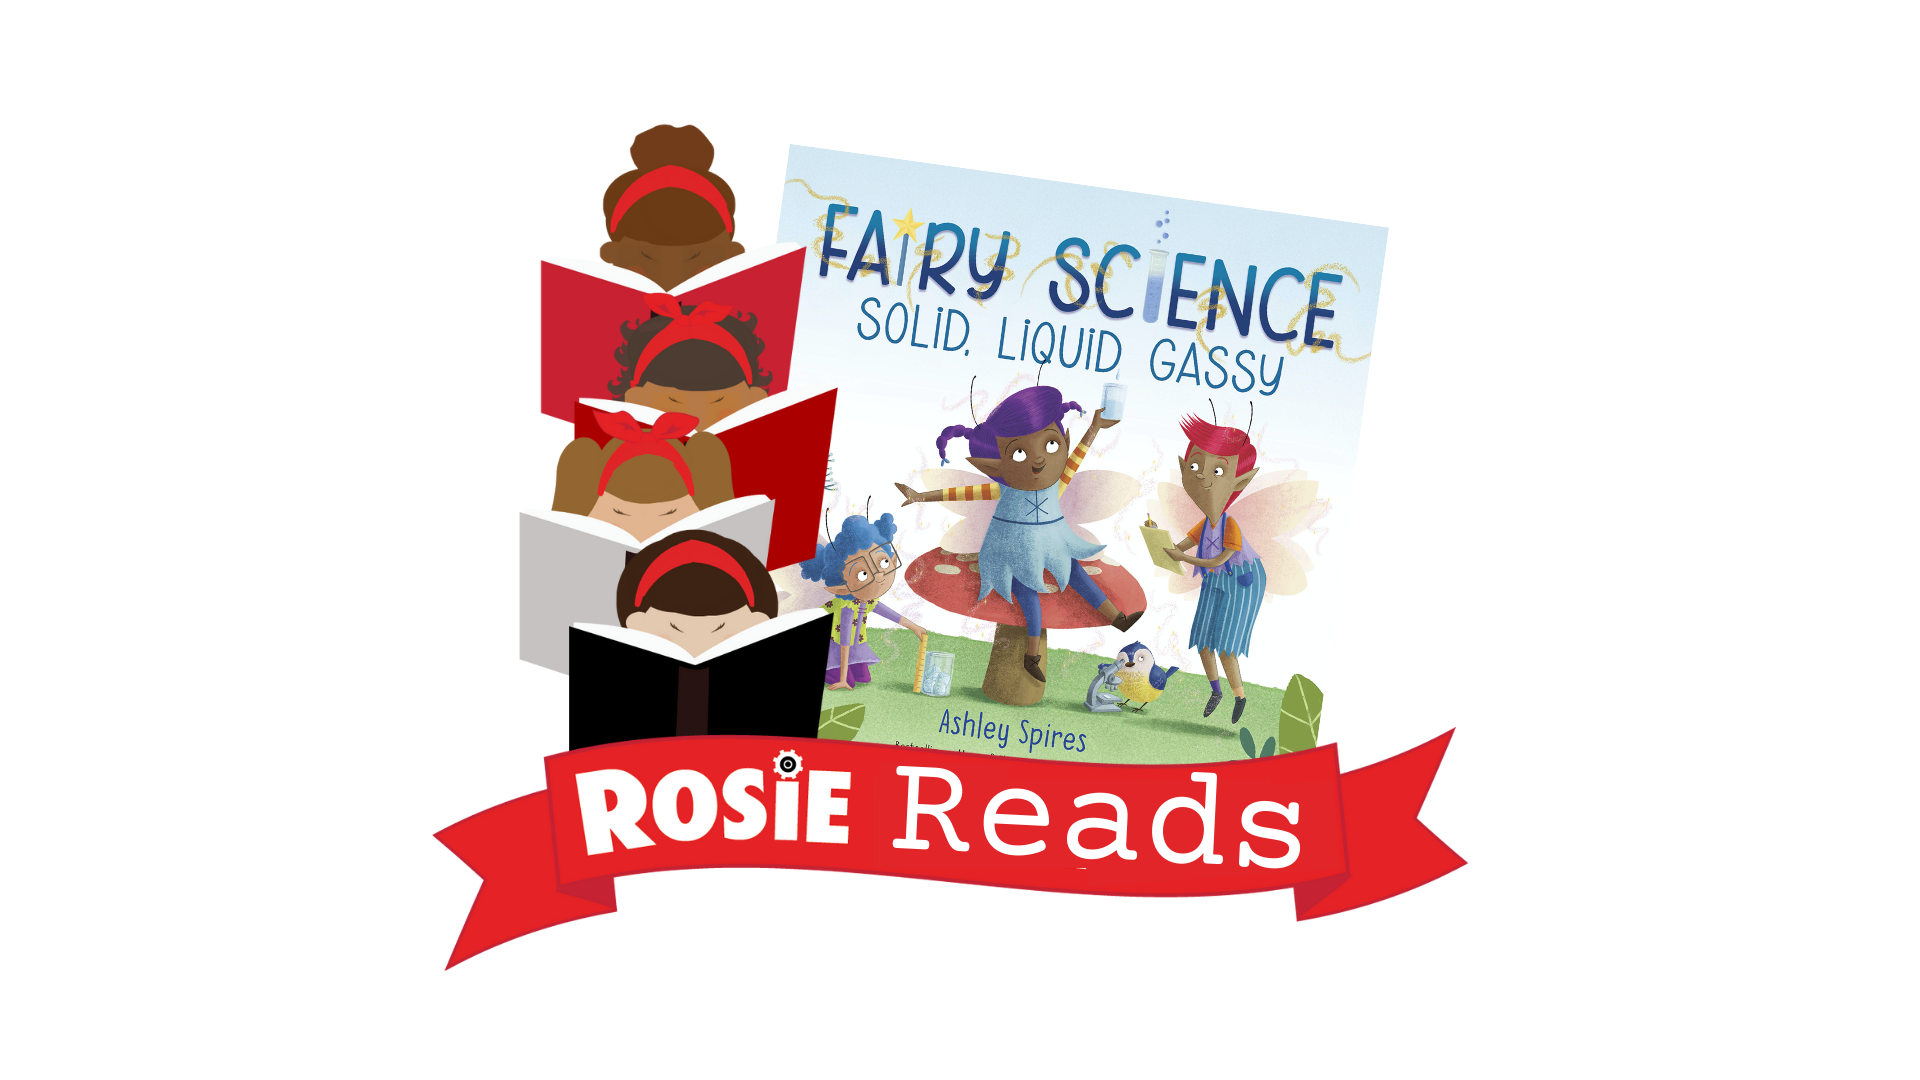 Fairy Science Book Cover with Rosie Reads Banner